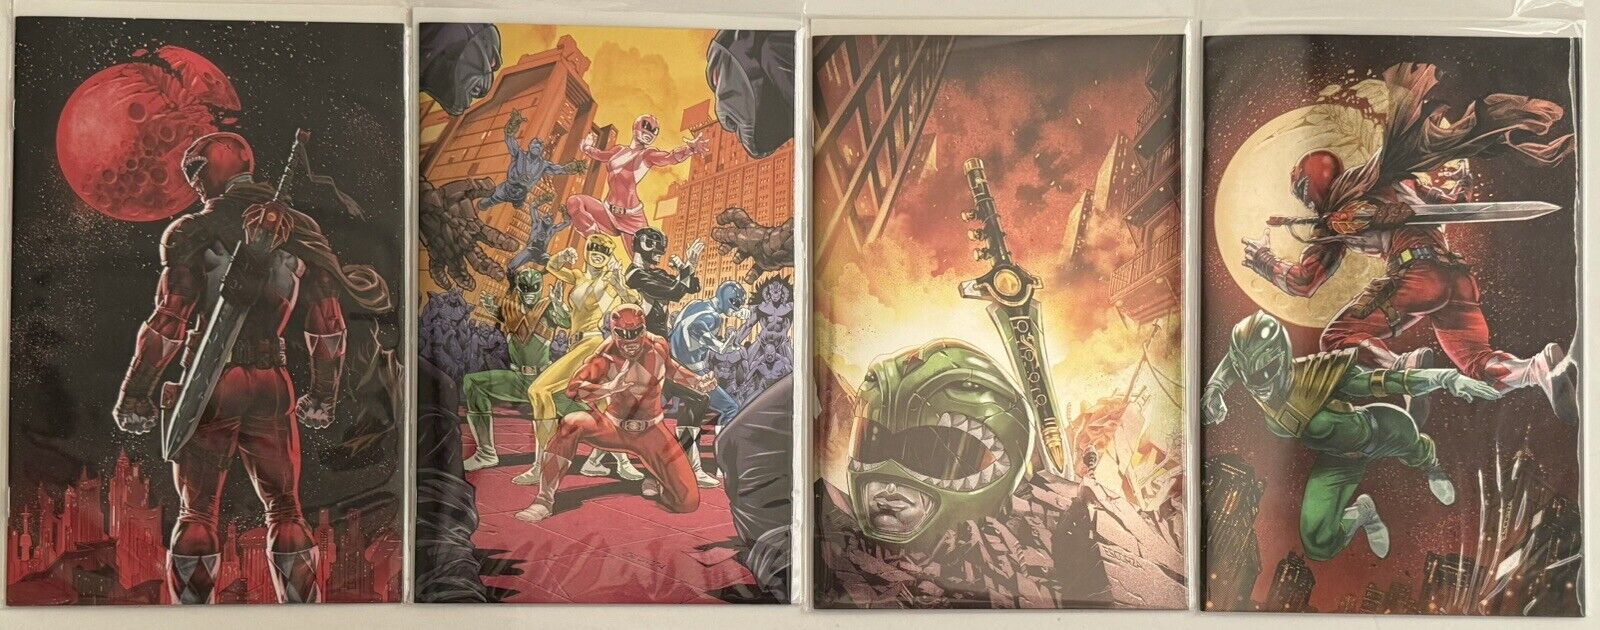 MMPR The Return #1,2,3 & 4 FOIL Variant Covers By The Escorza Brothers / 4x1